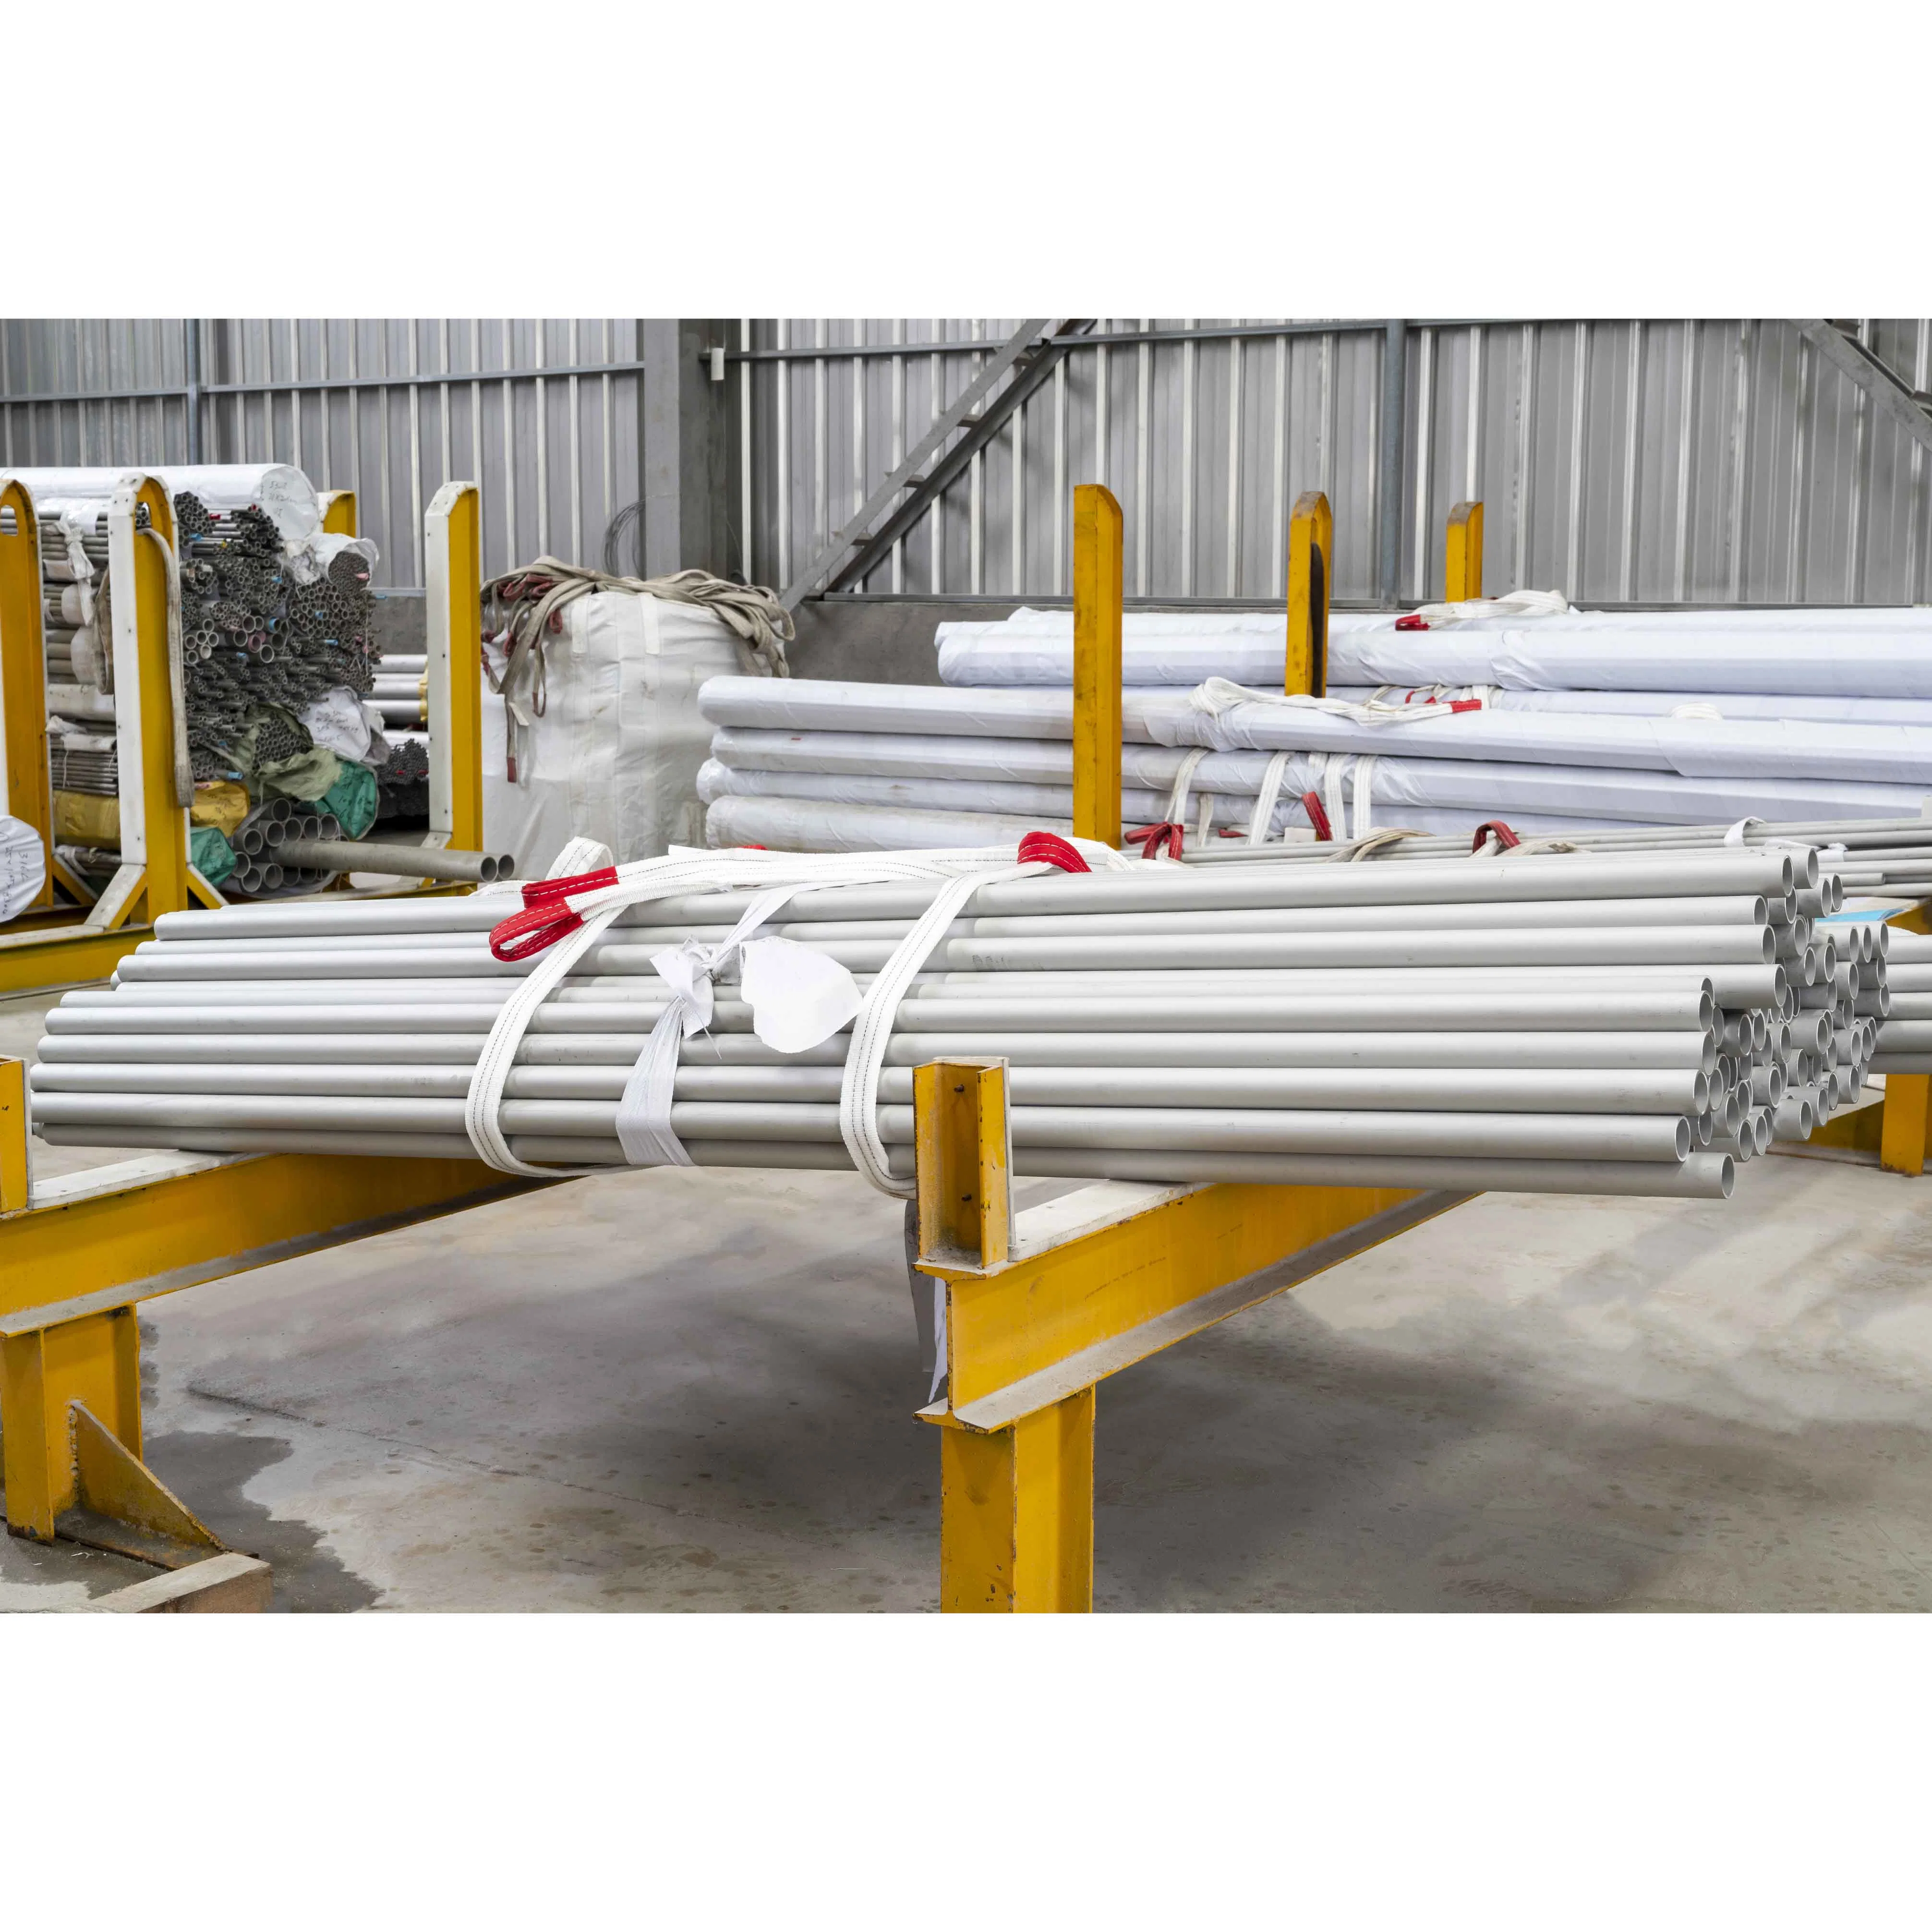 ASME B36.19. Duplex Water Pipes Sch40s S32205 Stainless Steel 8" Seamless ISO Seawater Round Seamless Tube Duplex Steel 1 Ton